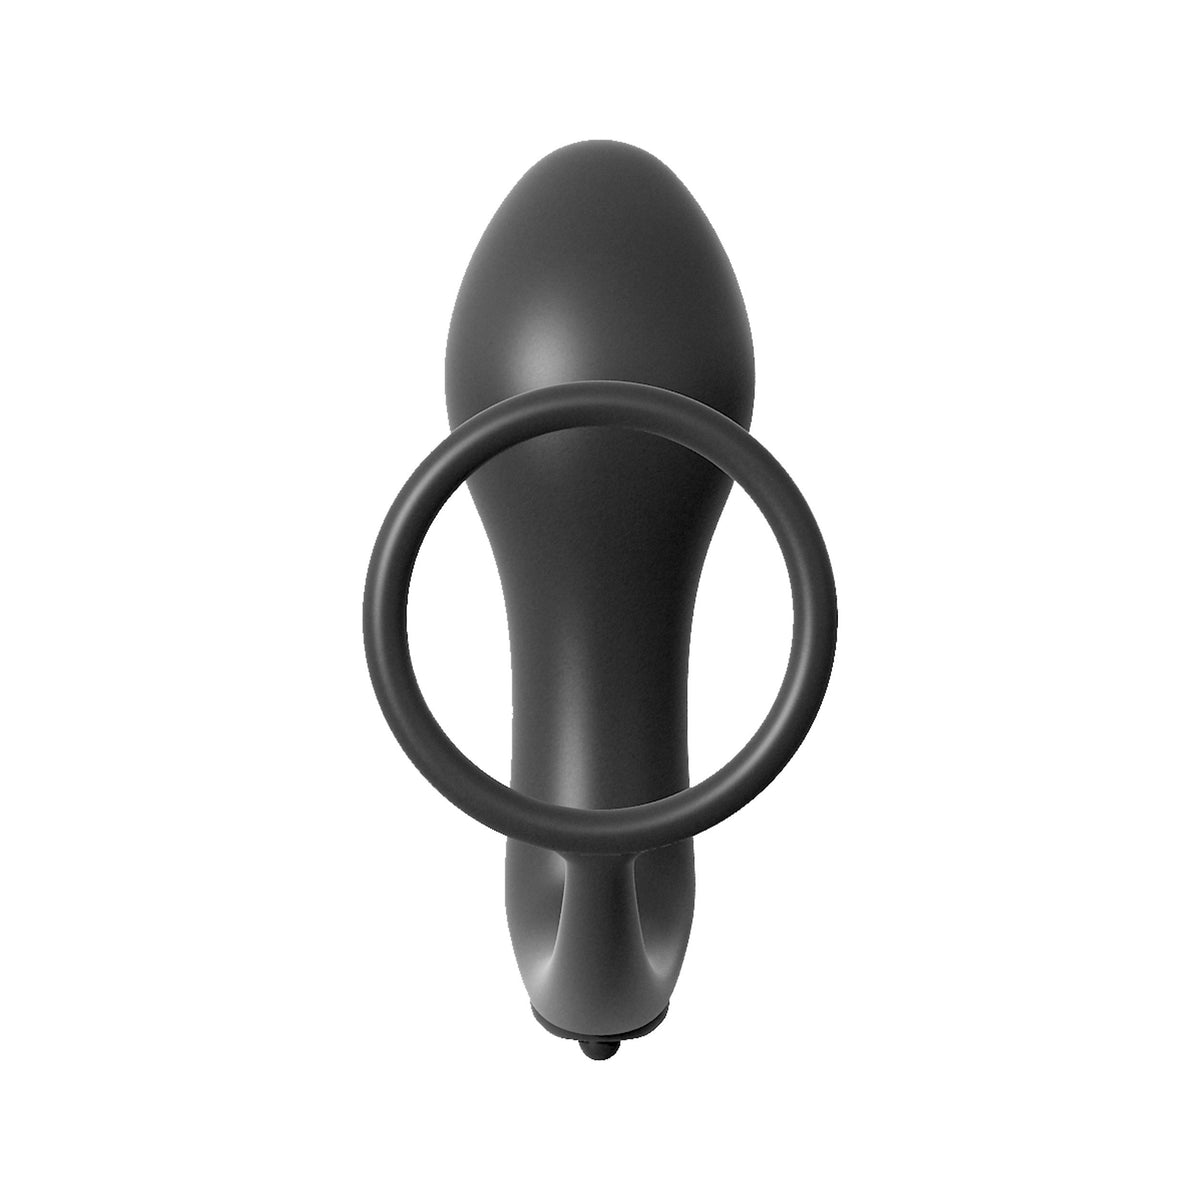 Pipedream - Anal Fantasy Collection Ass-Gasm Cockring Vibrating Plug (Black) PD1520 CherryAffairs